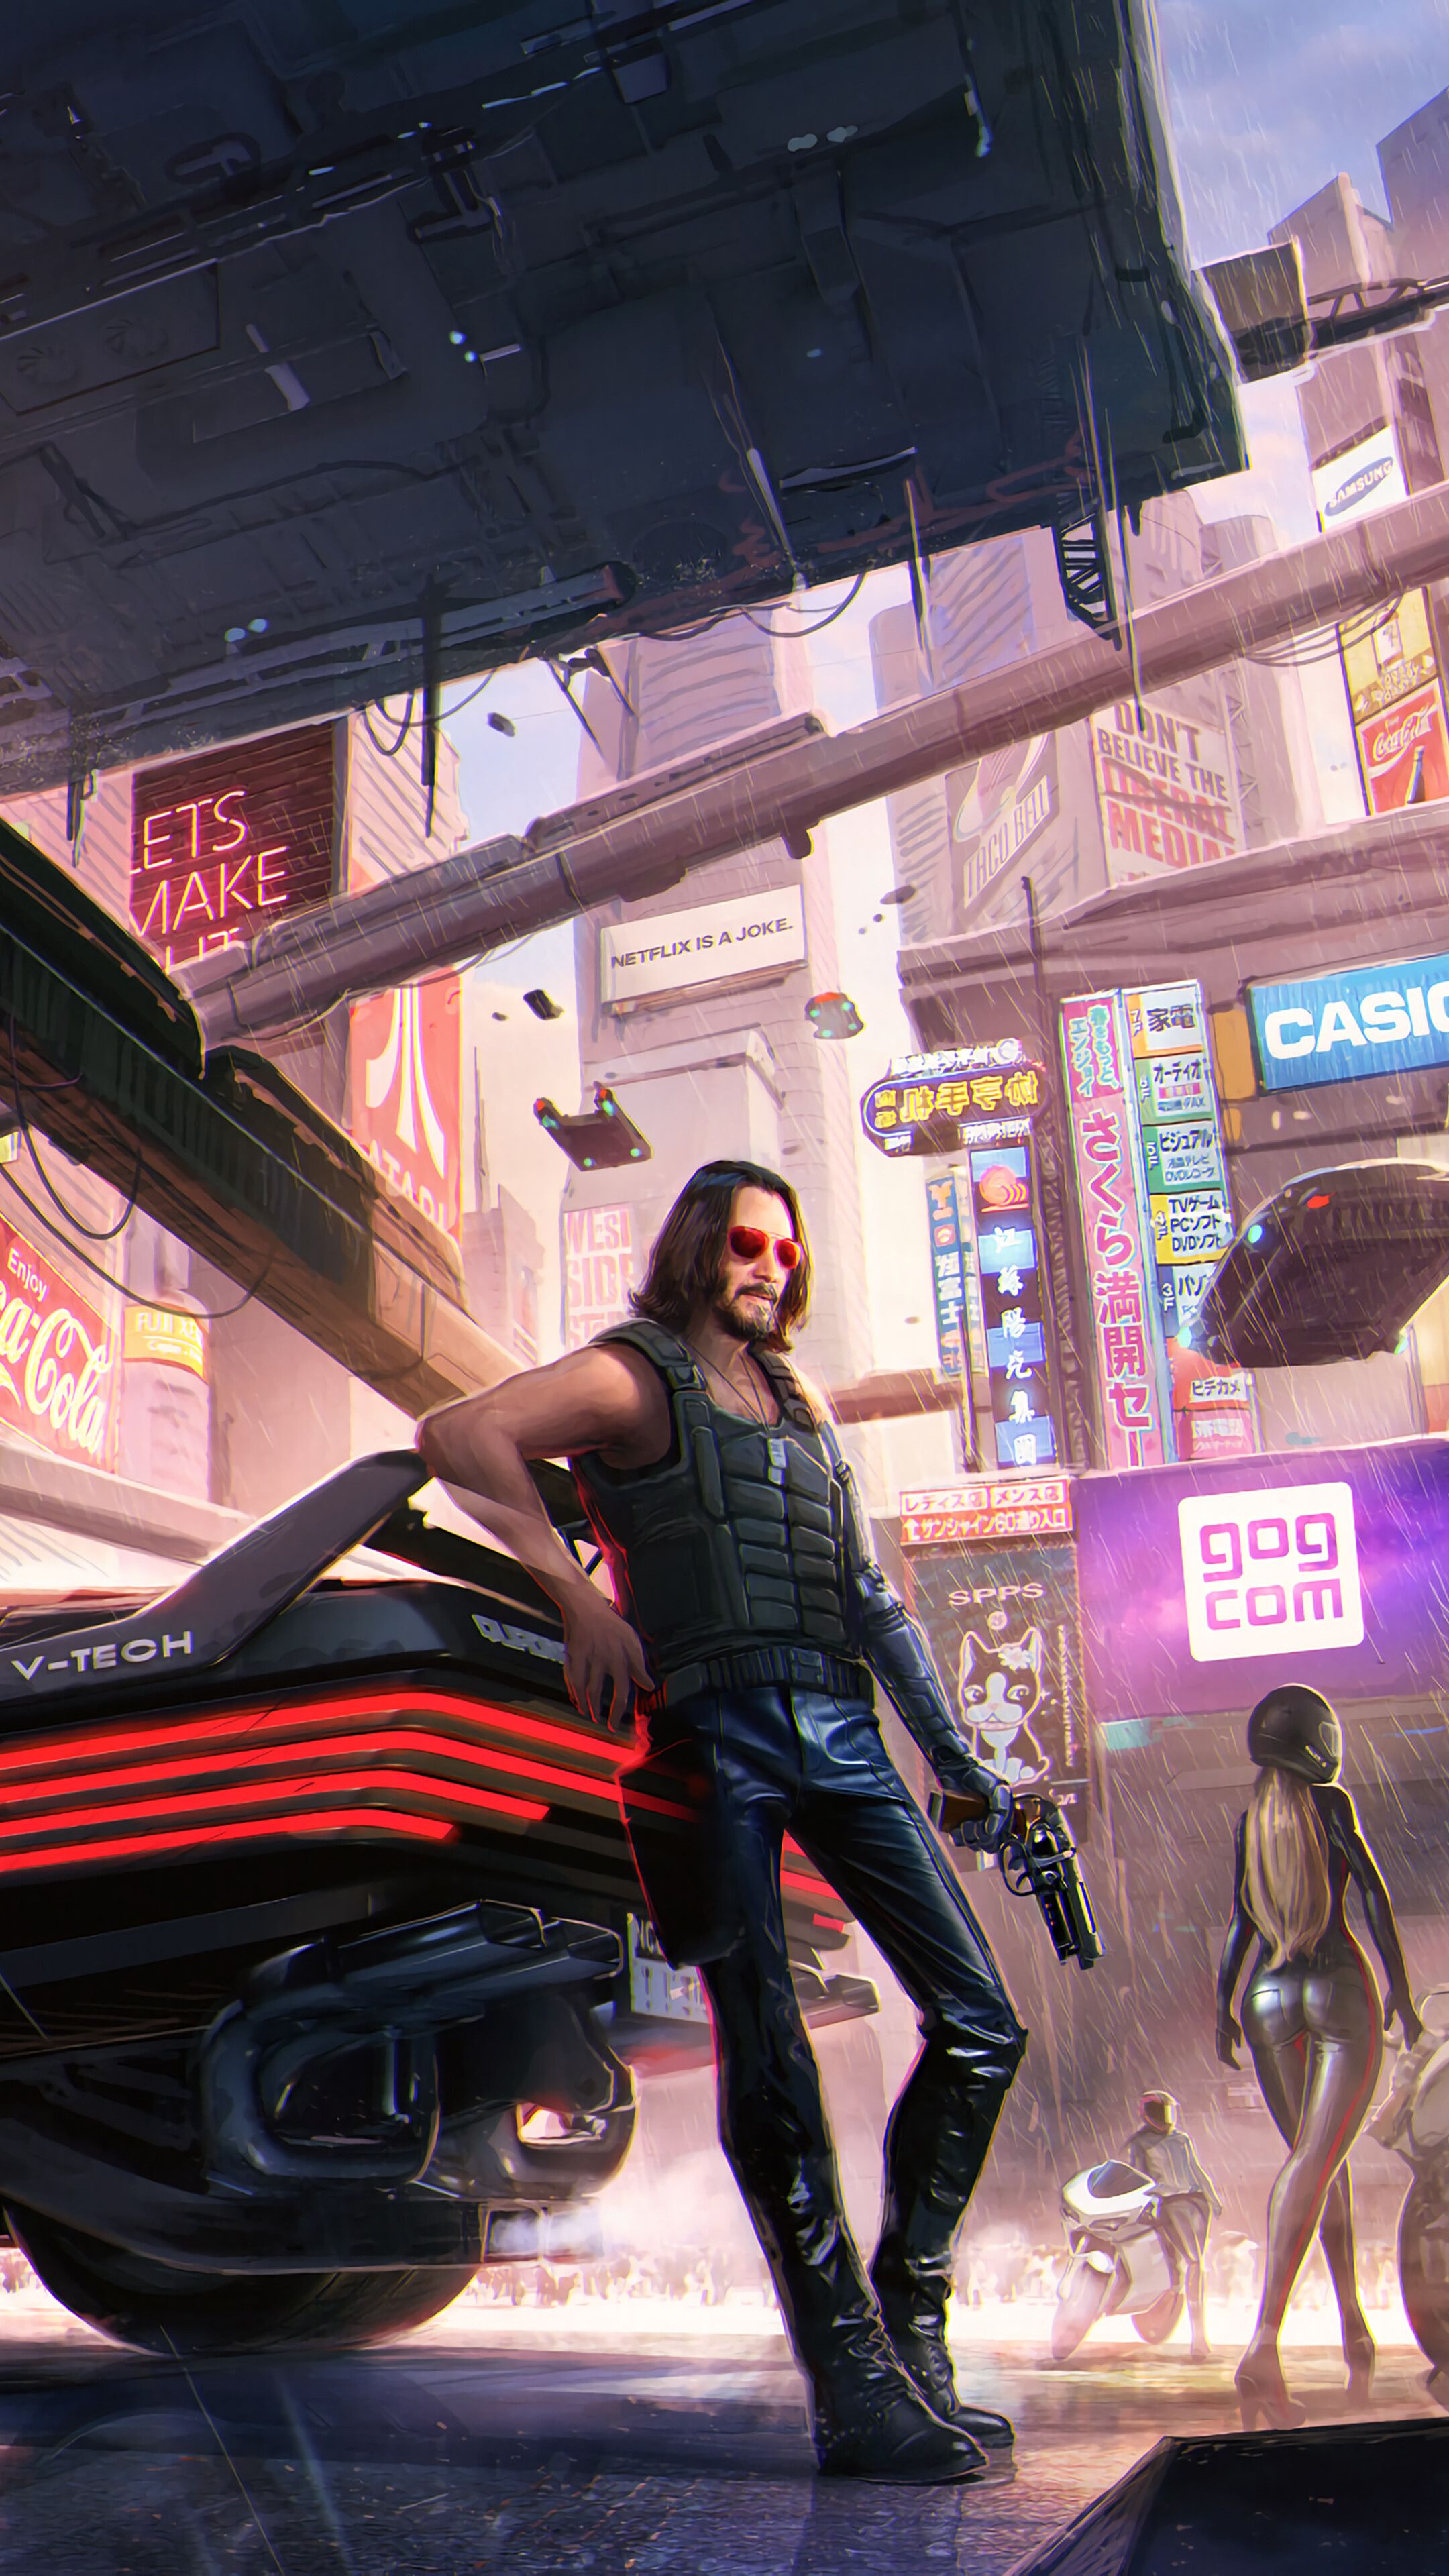 Johnny Silverhand, Keanu Reeves, Cyberpunk 4K phone HD Wallpaper, Image, Background, Photo and Picture